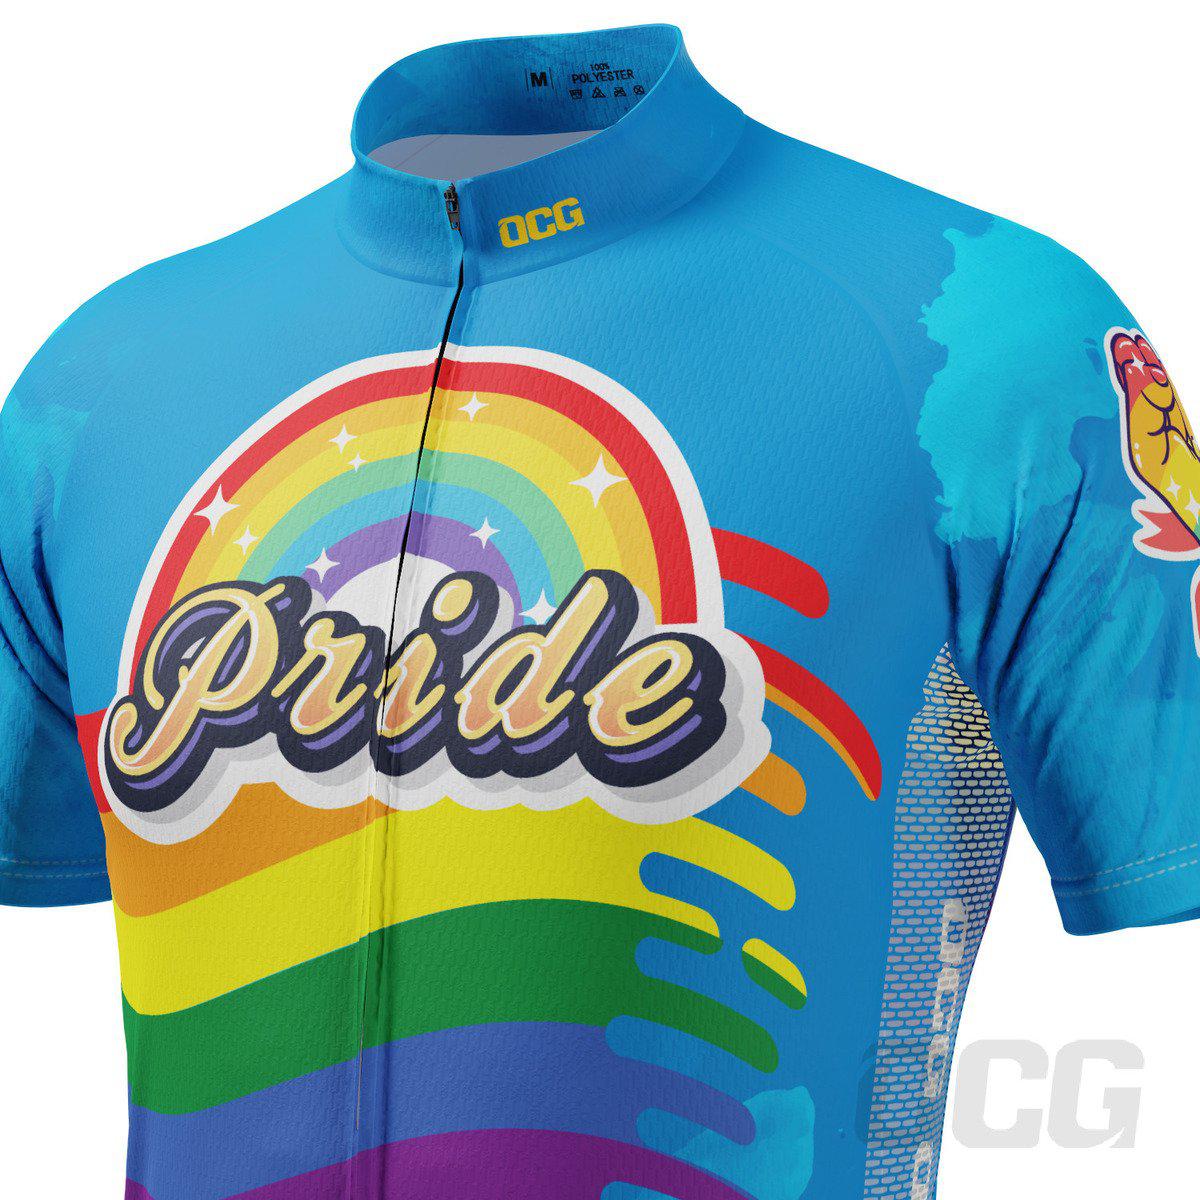 Men's Lgbt Pride Rainbow Flag Short Sleeve Cycling Jersey Only 7XL by OCG